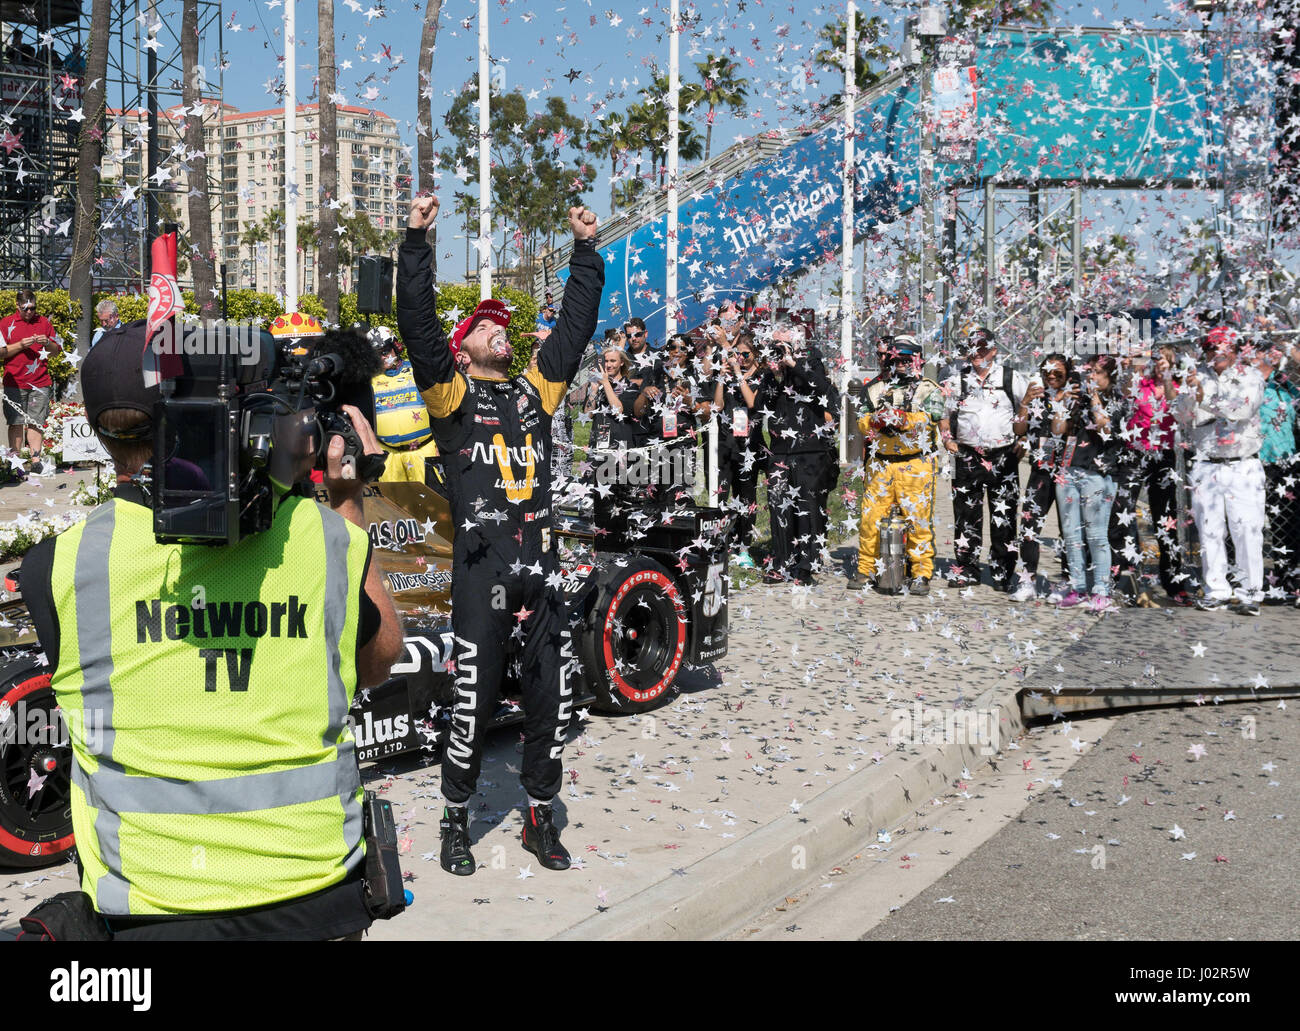 Long Beach, California, USA. 9th April, 2017. James Hinchcliffe driving the No. 5 Arrow Honda claims victory at the 43rd Toyota Grand Prix of Long Beach. Sebastien Bourdais of Dale Coyne Racing claimed 2nd place with Team Penske's Josef Newgarden taking 3rd place. Long Beach California. Steven Erler/CSM/Alamy Live News Stock Photo